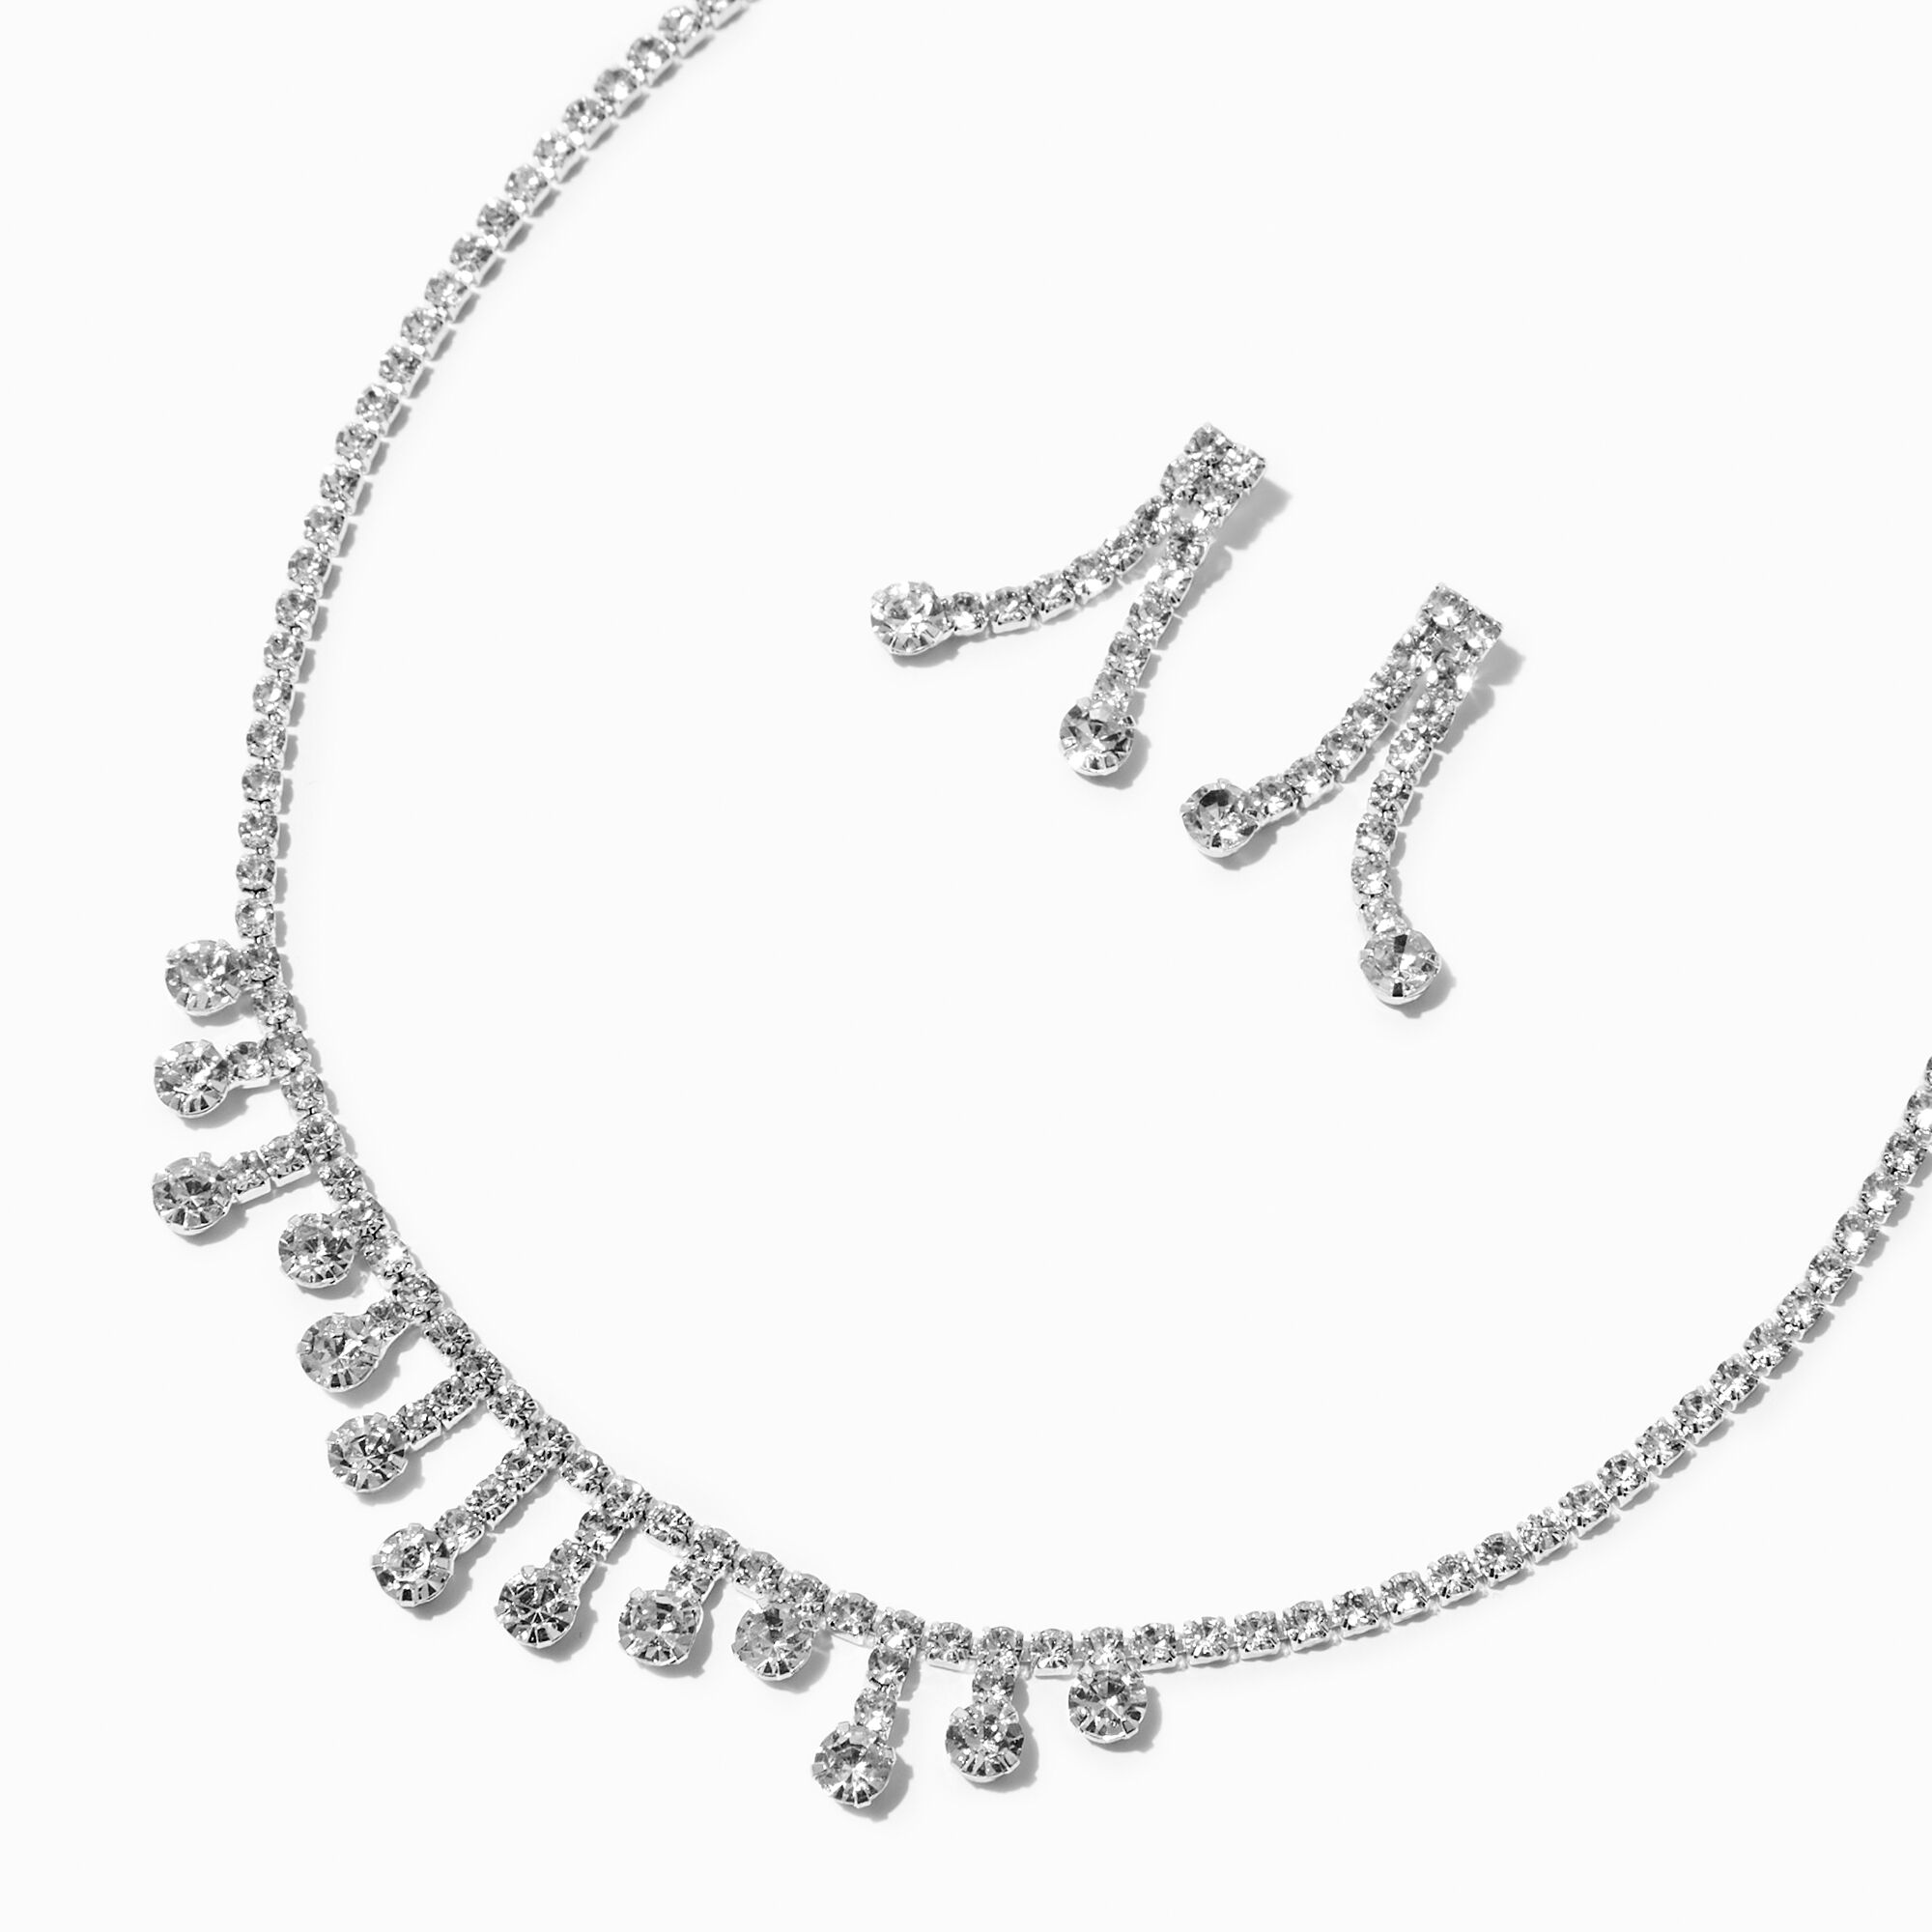 View Claires Tone Crystal Mini Drip Choker Drop Earrings Set 2 Pack Silver information